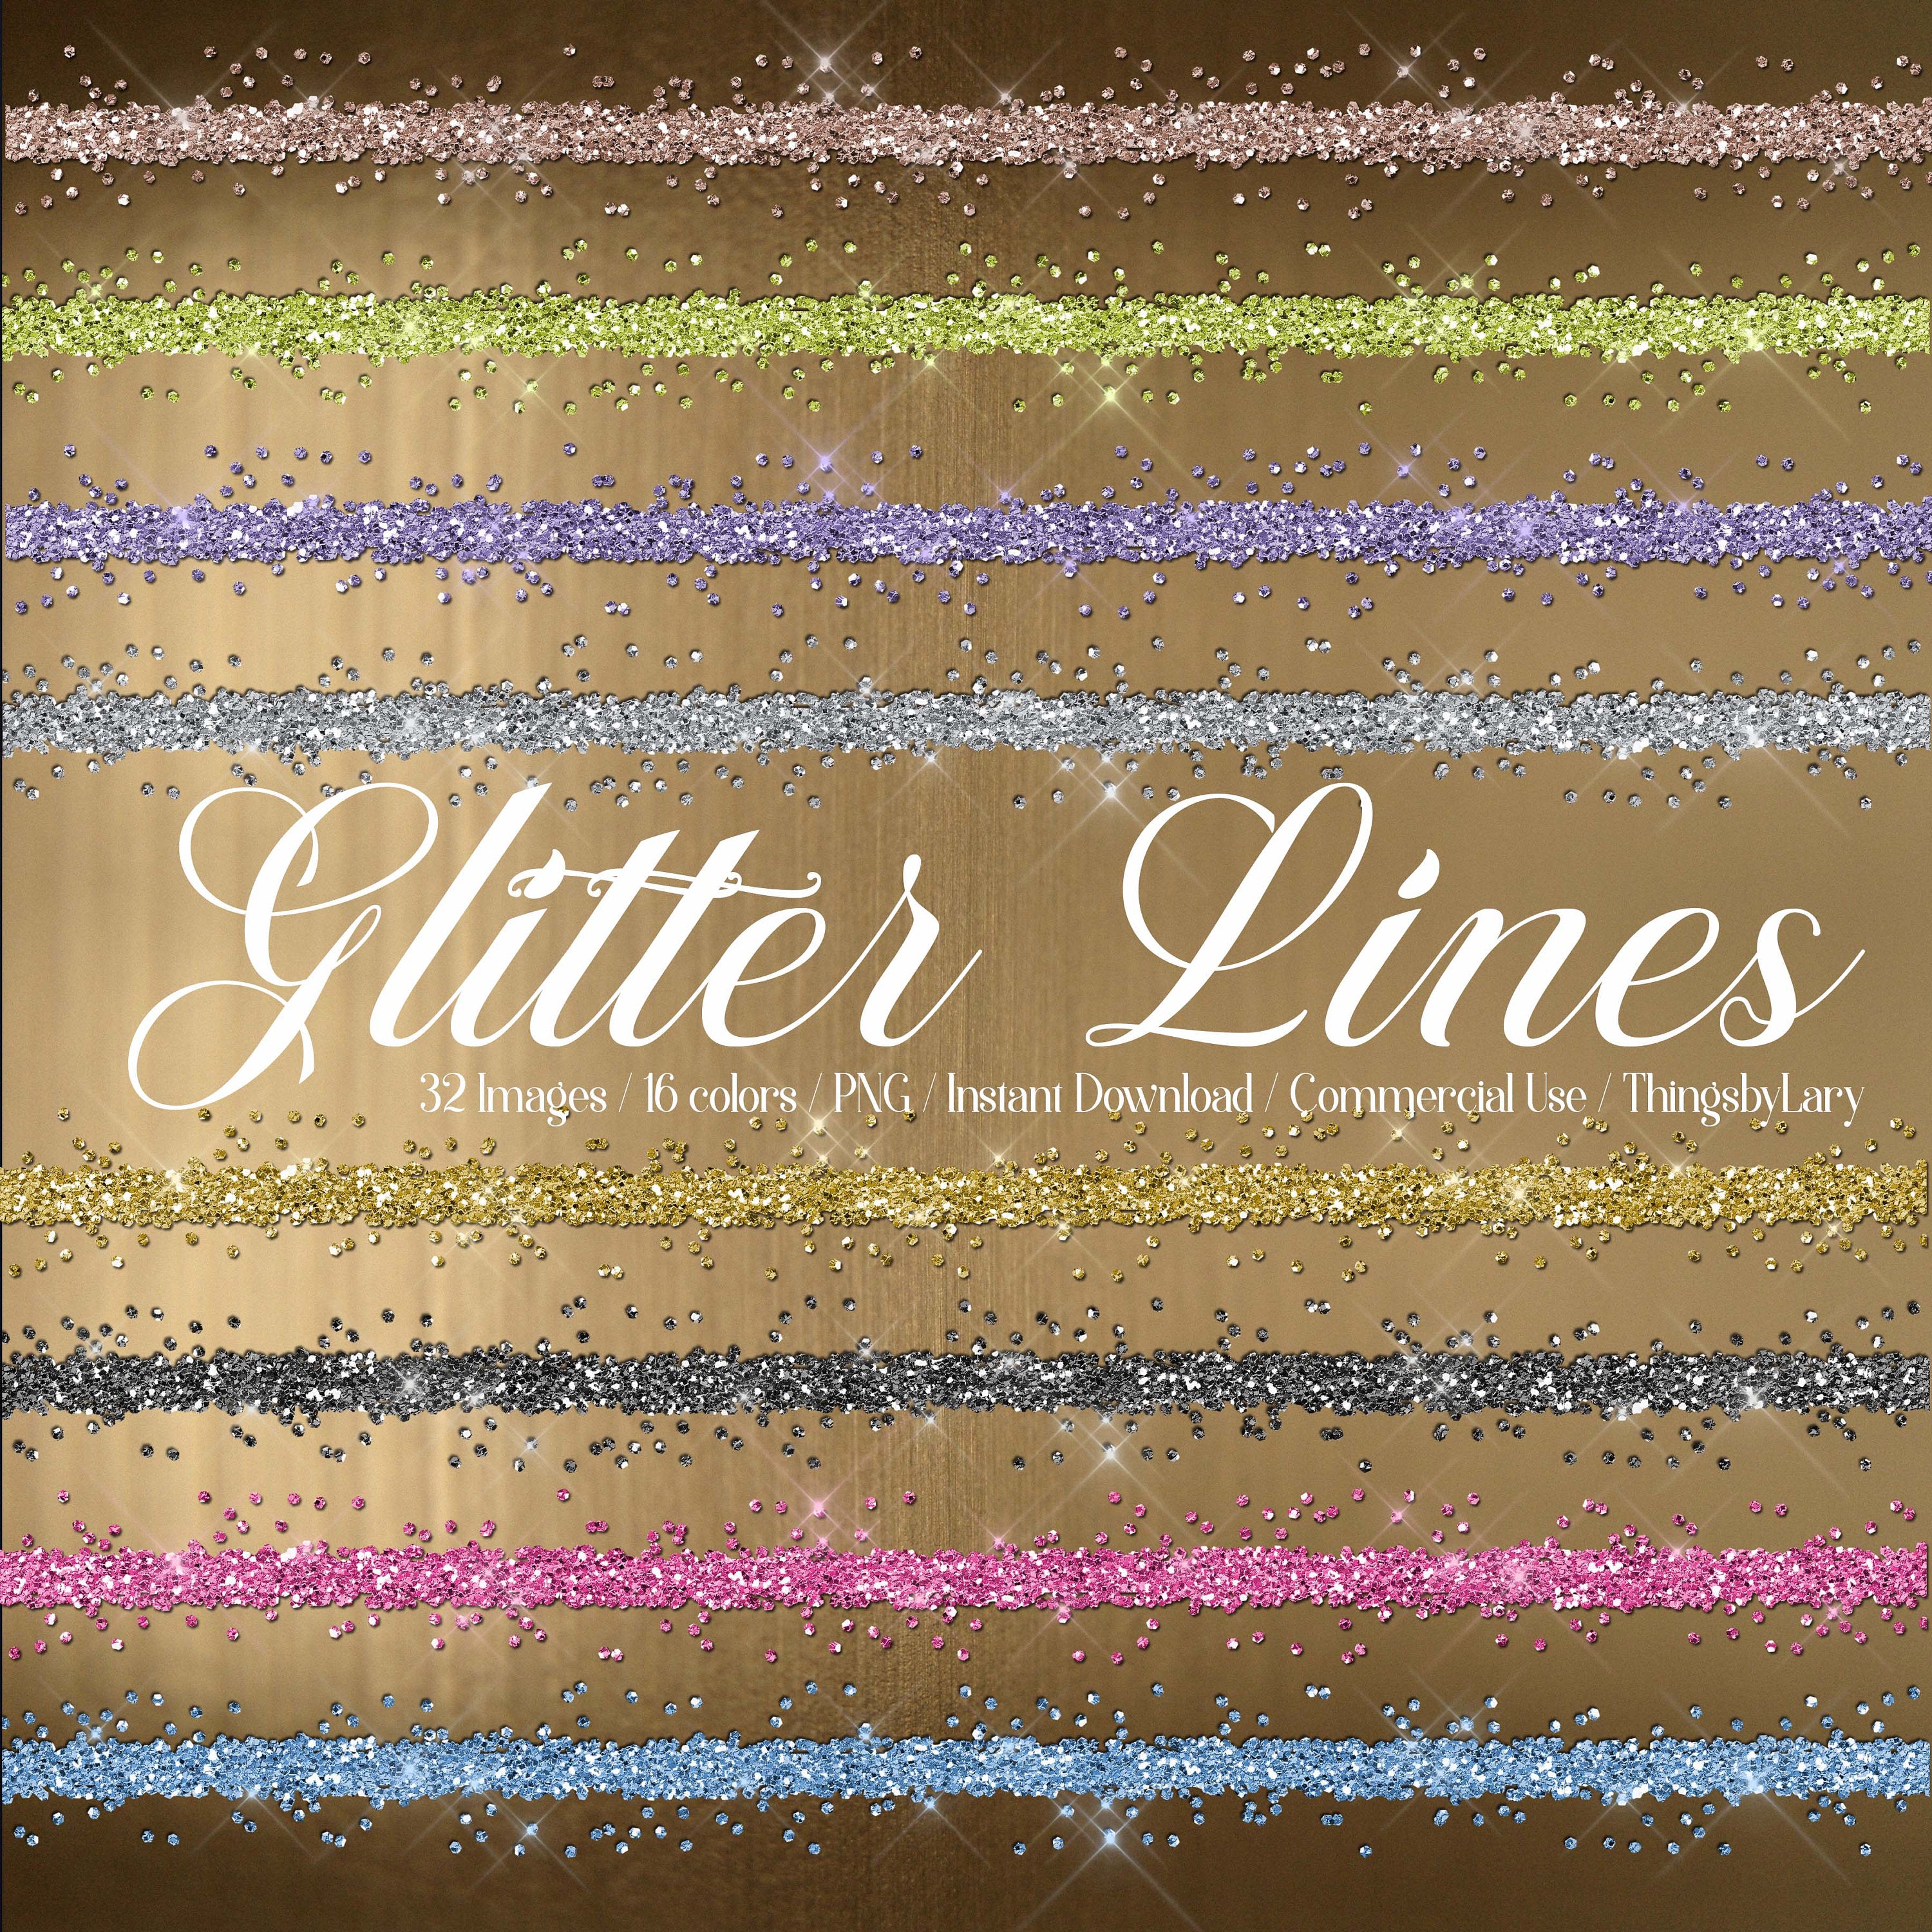 32 Seamless Glitter Border Line Overlay Images 300 Dpi PNG Commercial Use Instant Download 16 Colors Glitter Overlay Photo Party Overlay